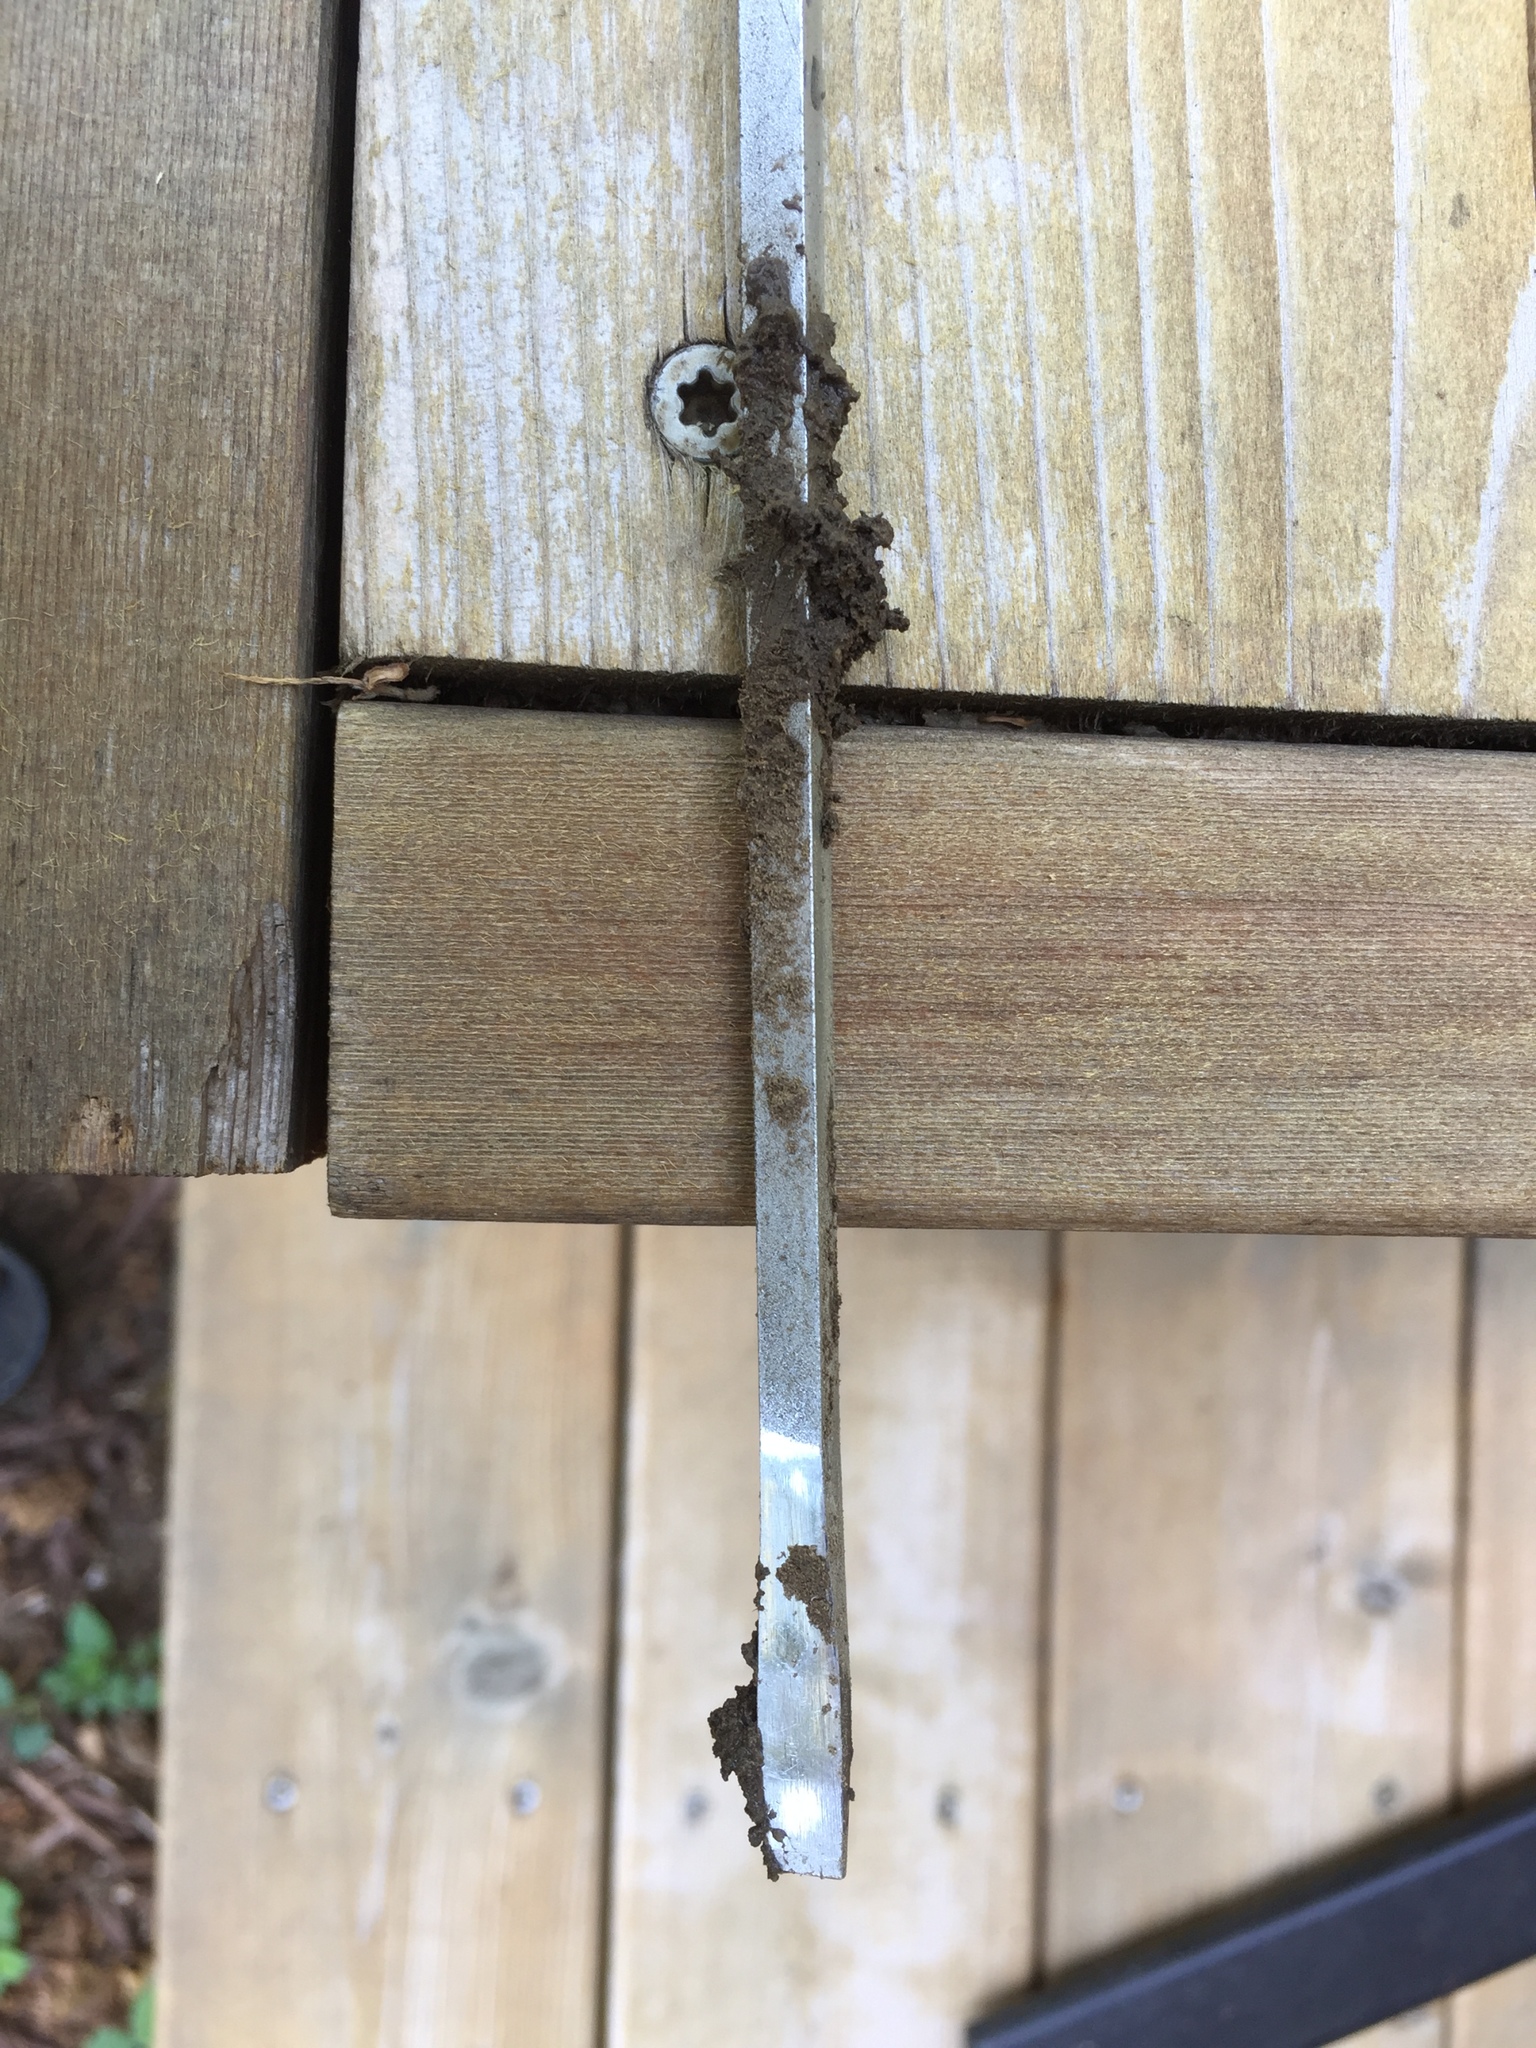 screwdriver showing mud on it 